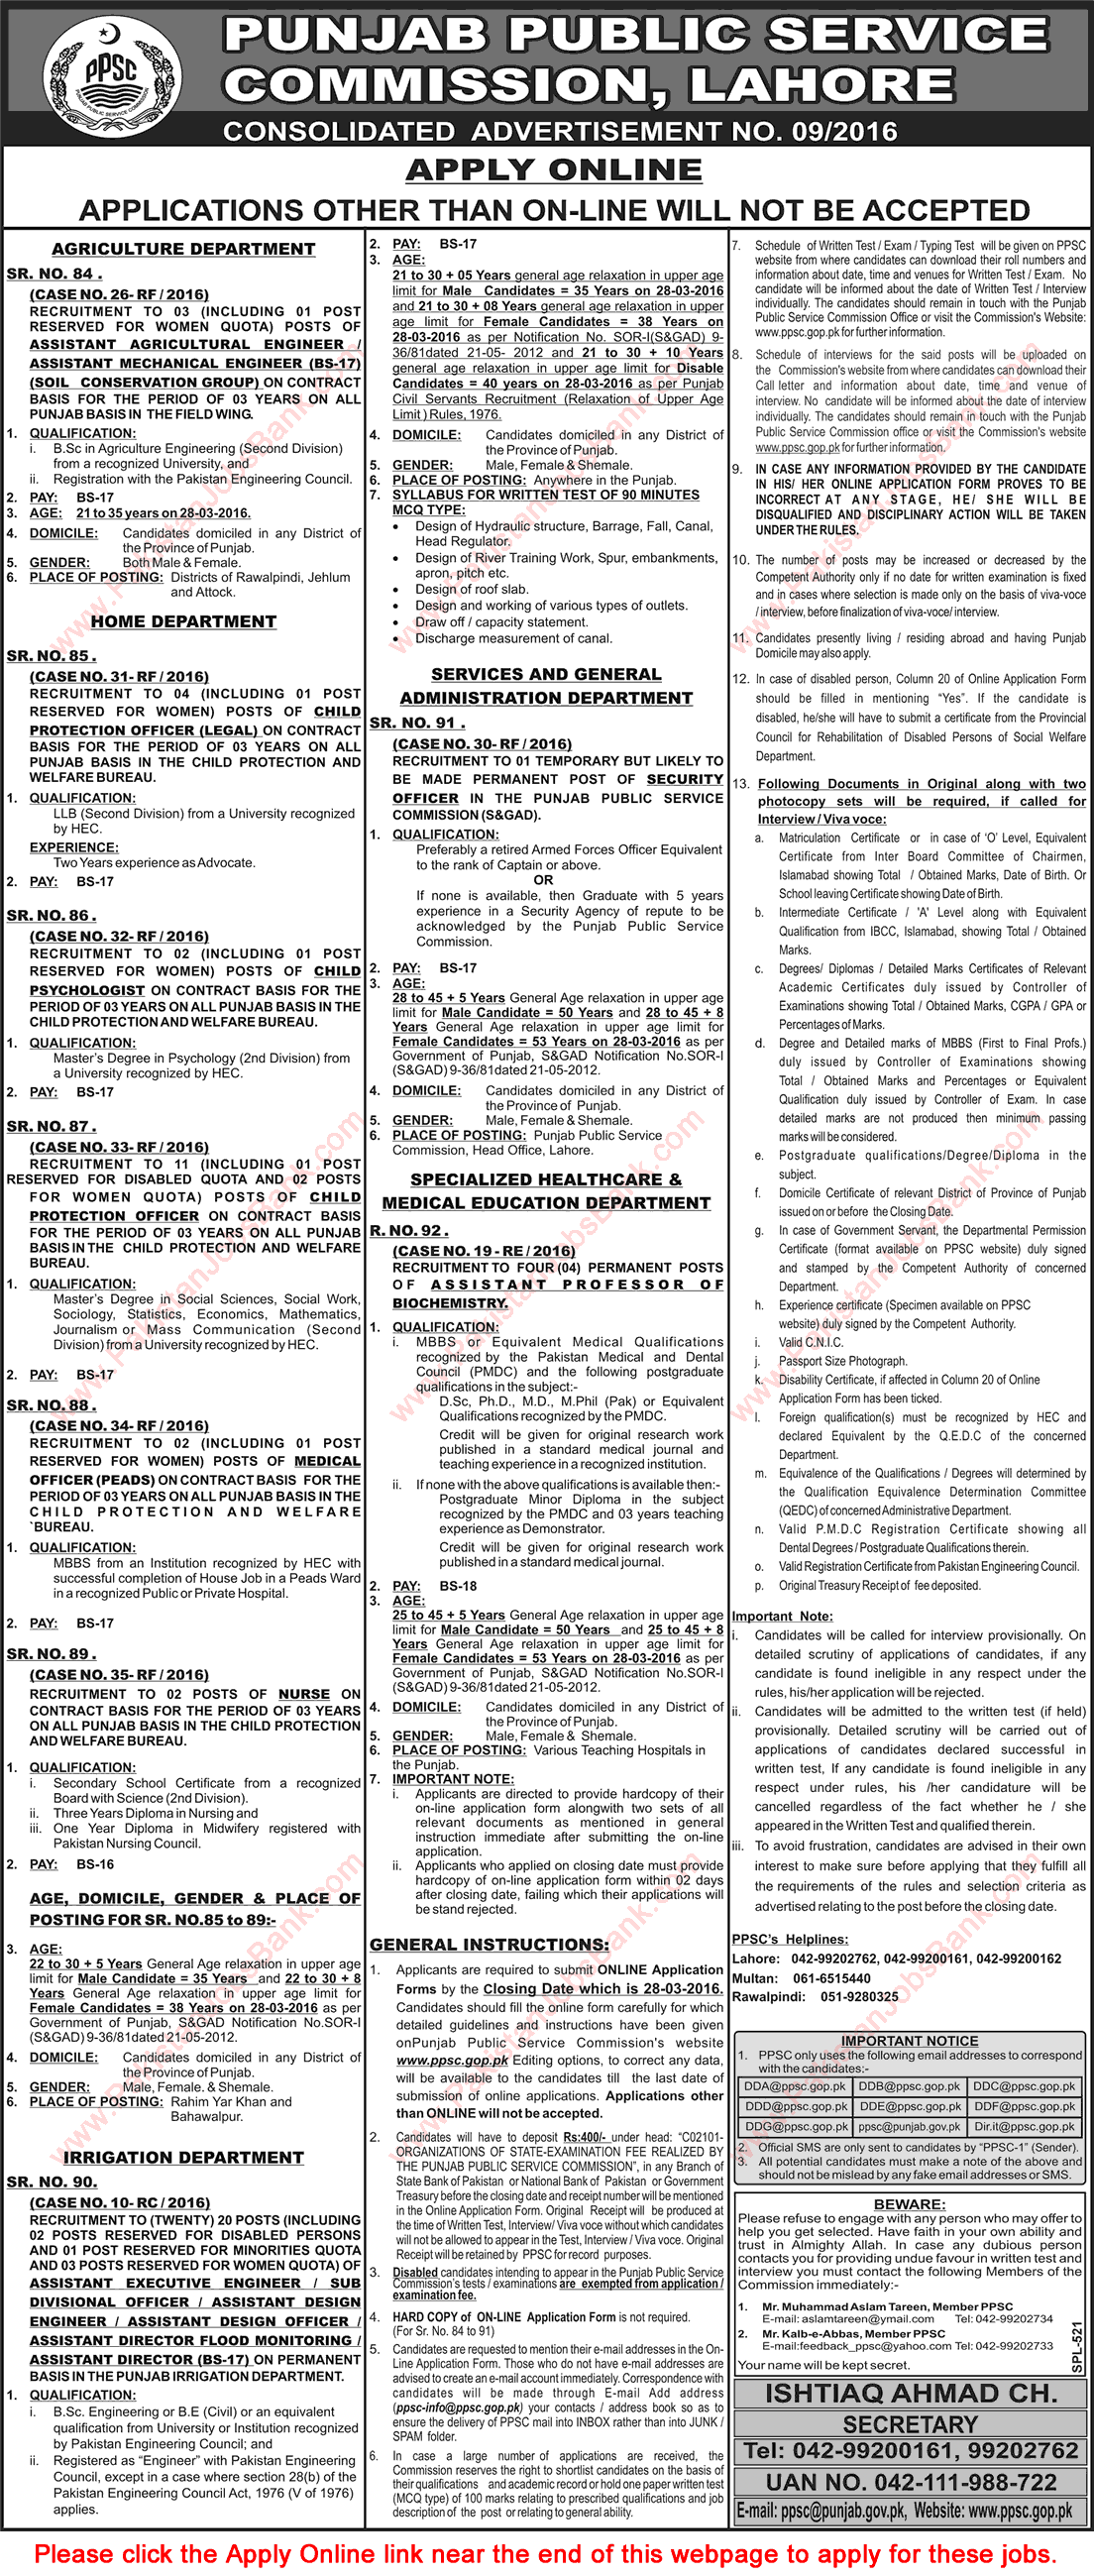 PPSC Jobs March 2016 Consolidated Advertisement No 09/2016 9/2016 Apply Online Latest